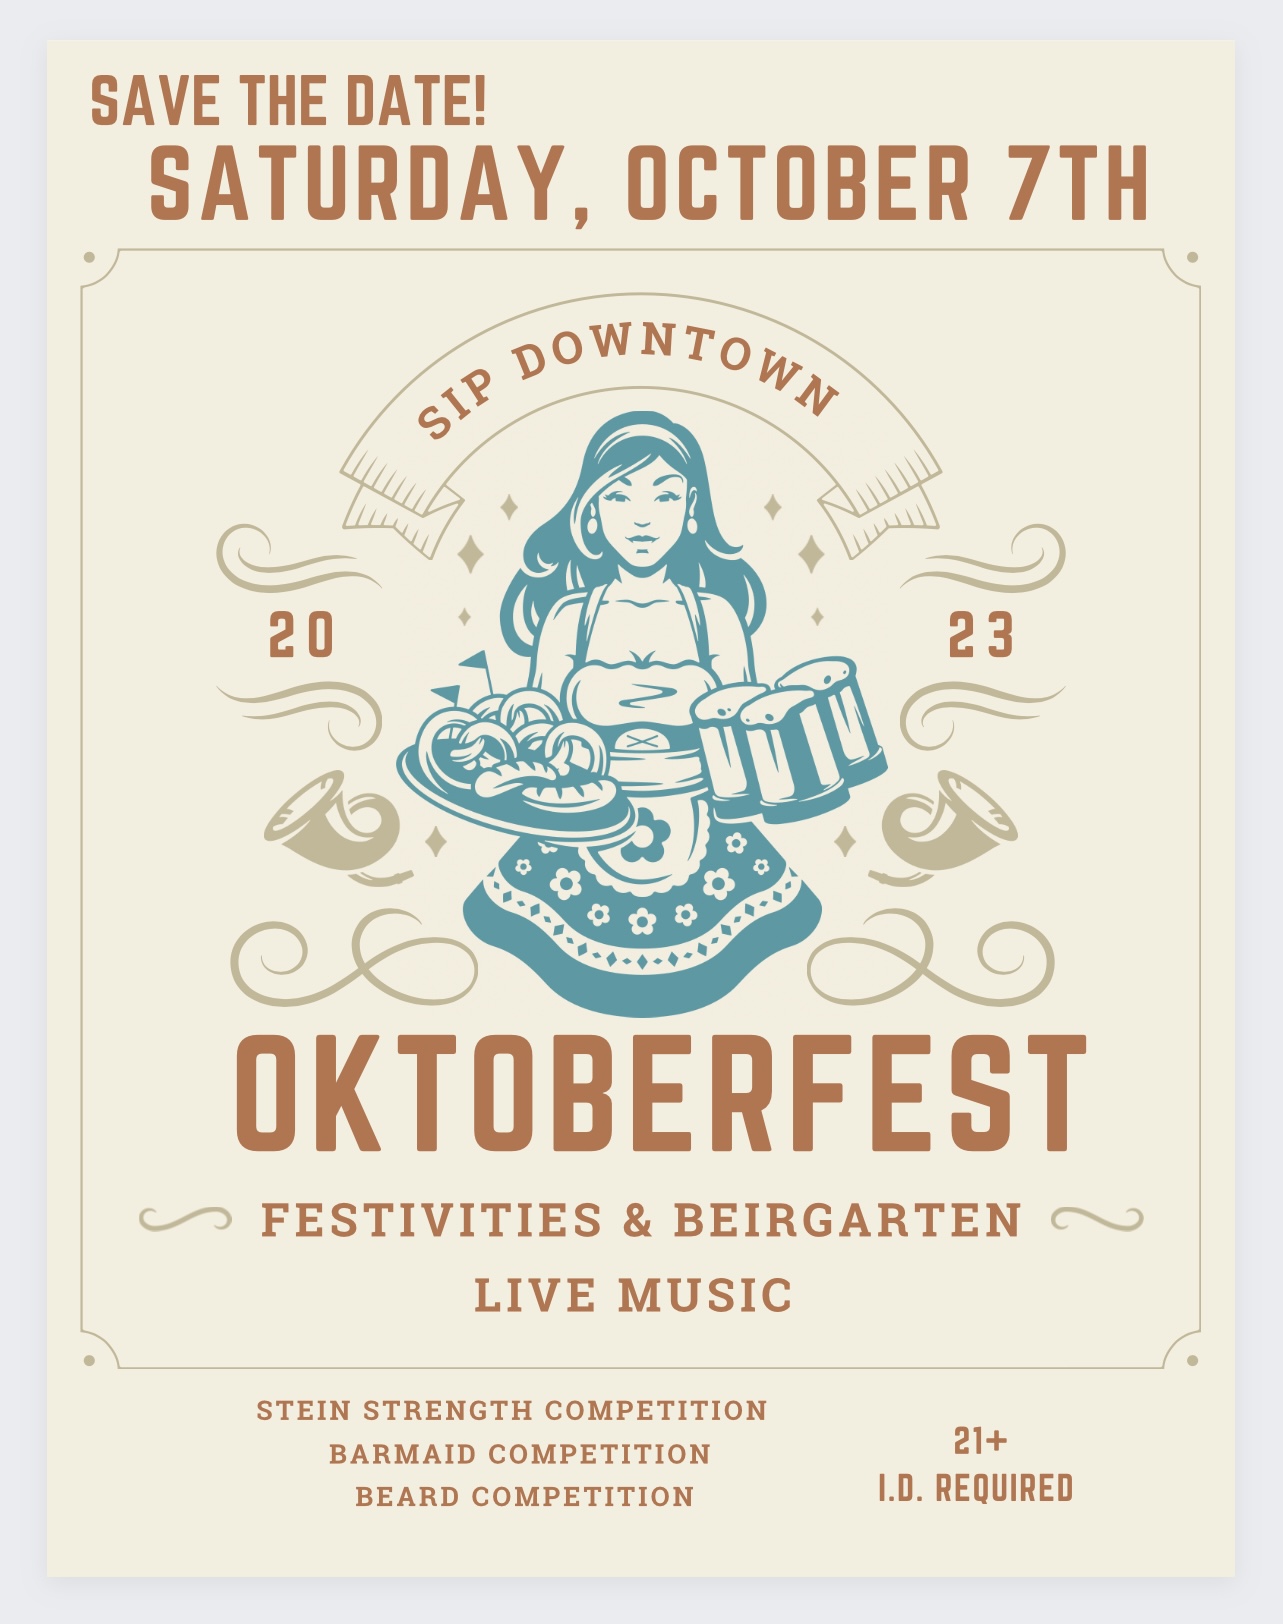 Check more about 3rd annual Oktoberfest - Sip Downtown